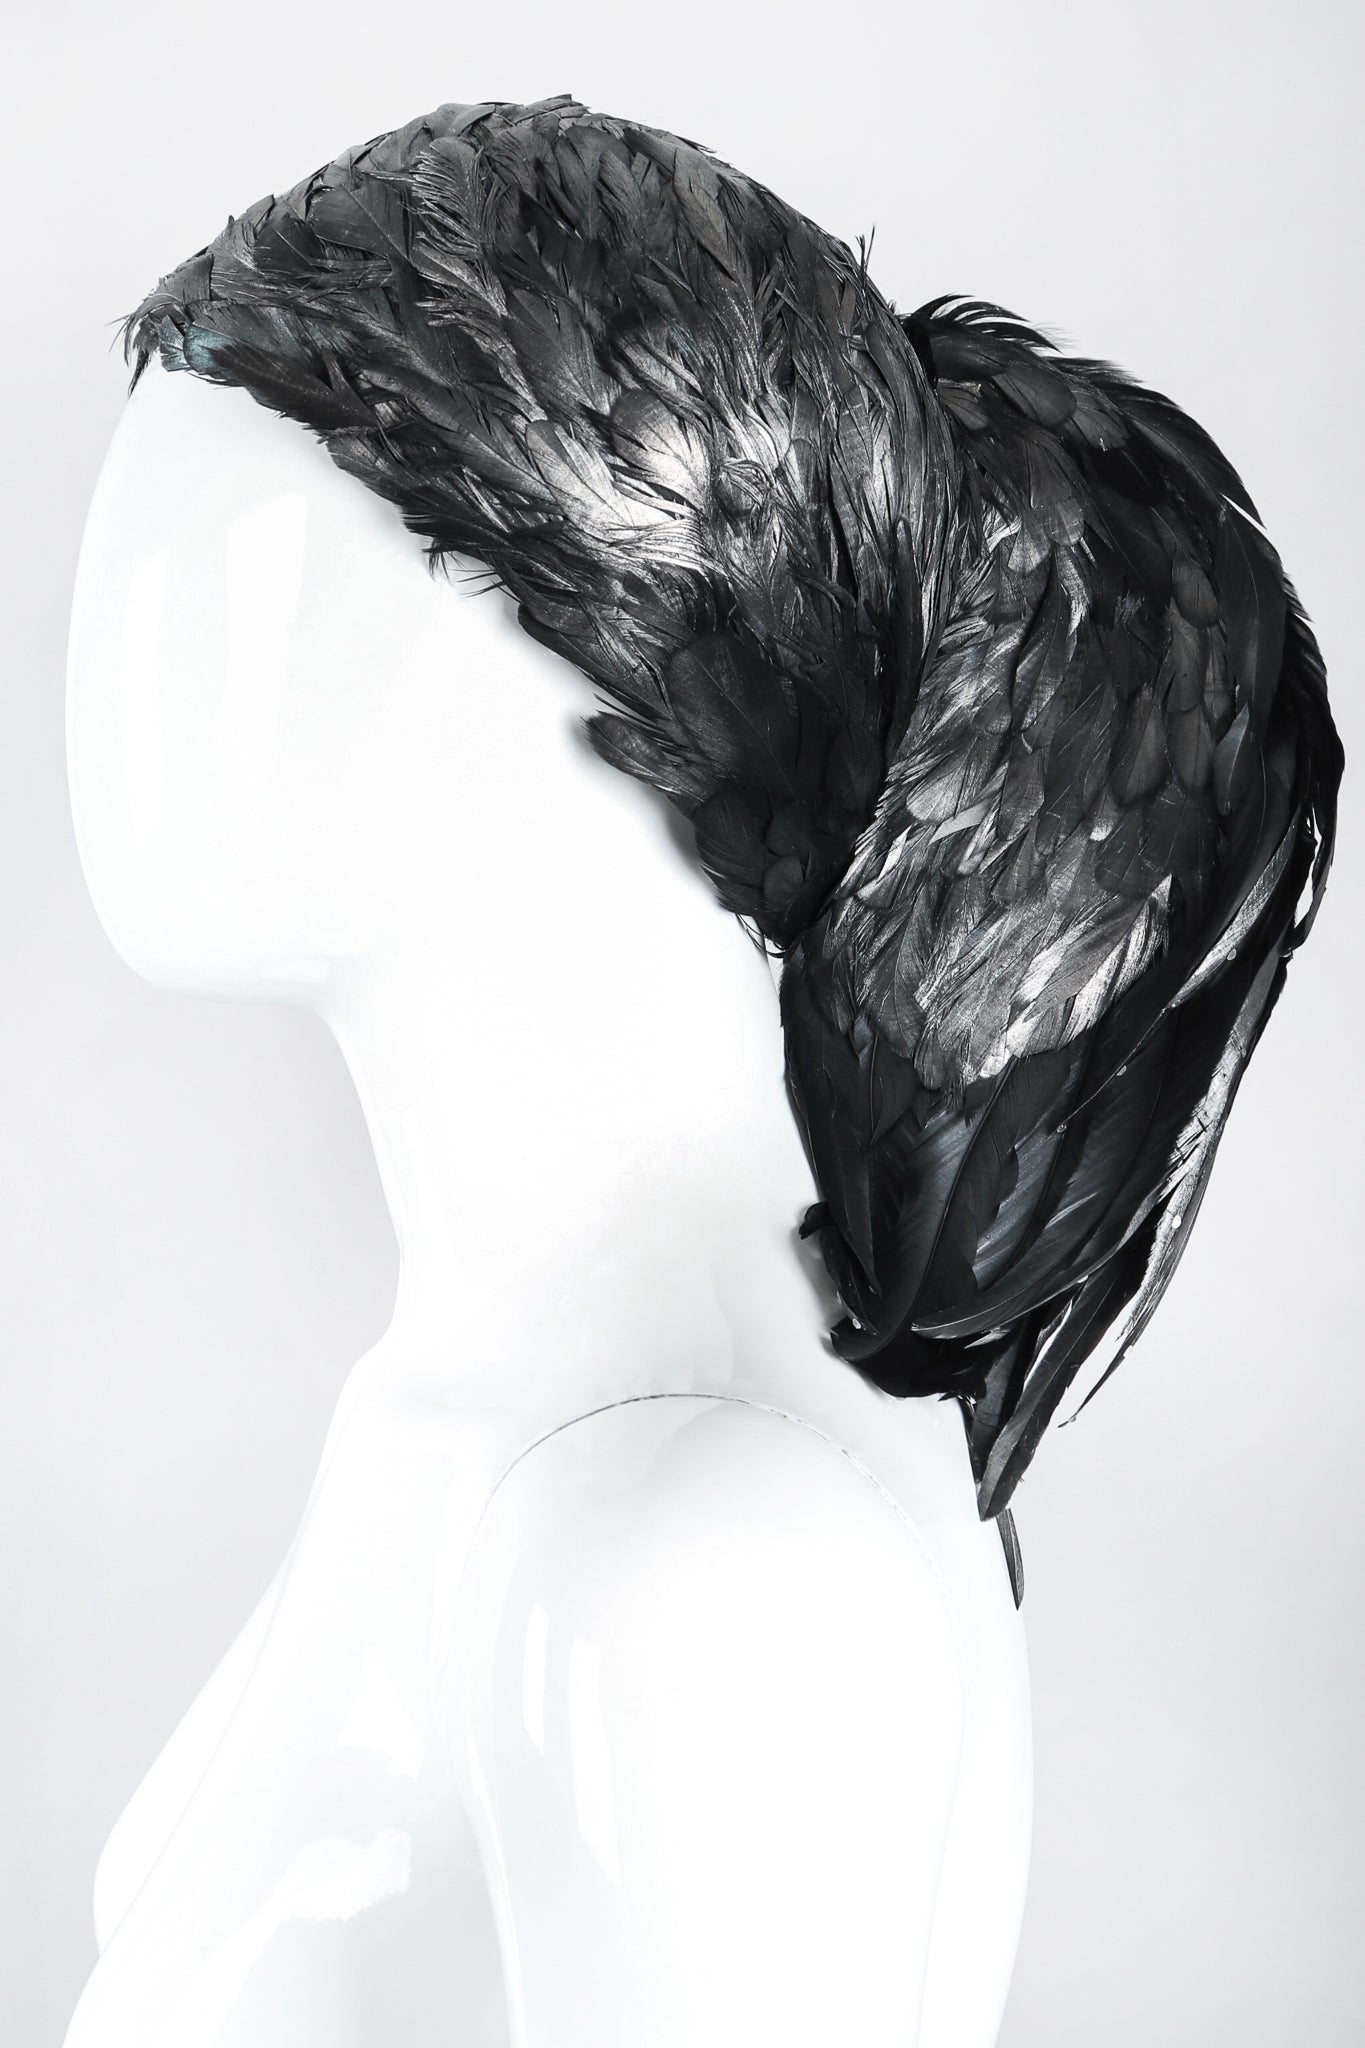 Recess Los Angeles Designer Consignment Vintage Millinery Jack McConnell Feather Waterfall Mohawk Casque Hat